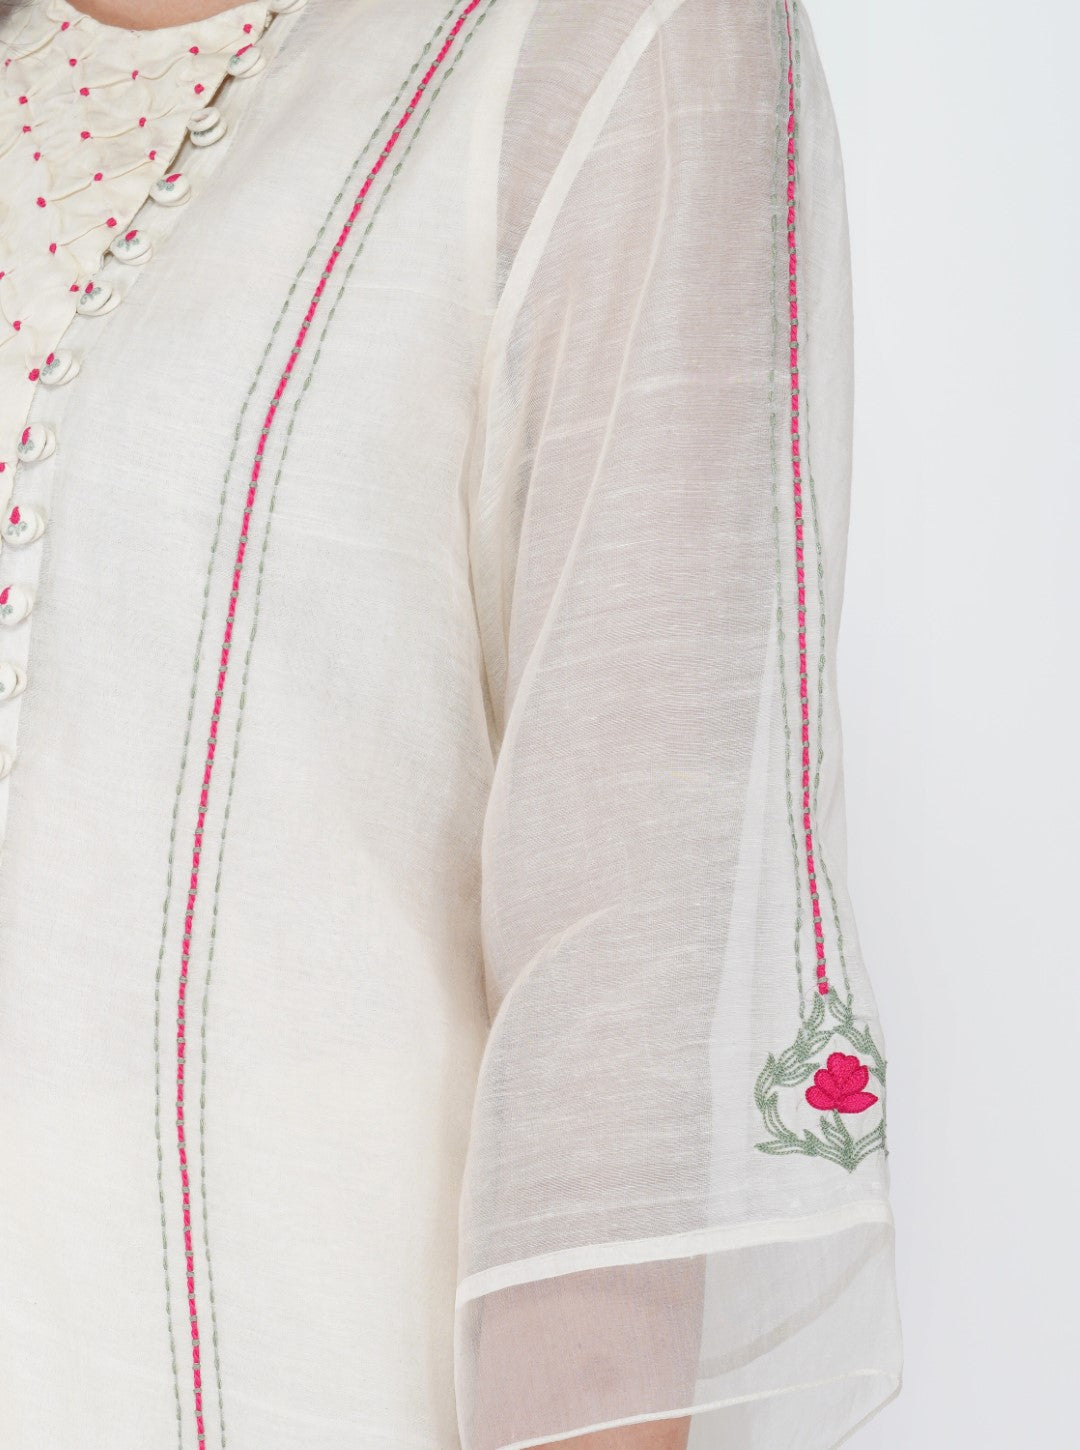 SAAWAN CREAM CHANDERI SMOCKING WITH FLORAL EMBROIDERY WITH COTTON AND ORGANZA SHEER PANTS WITH LACE DUPATTA